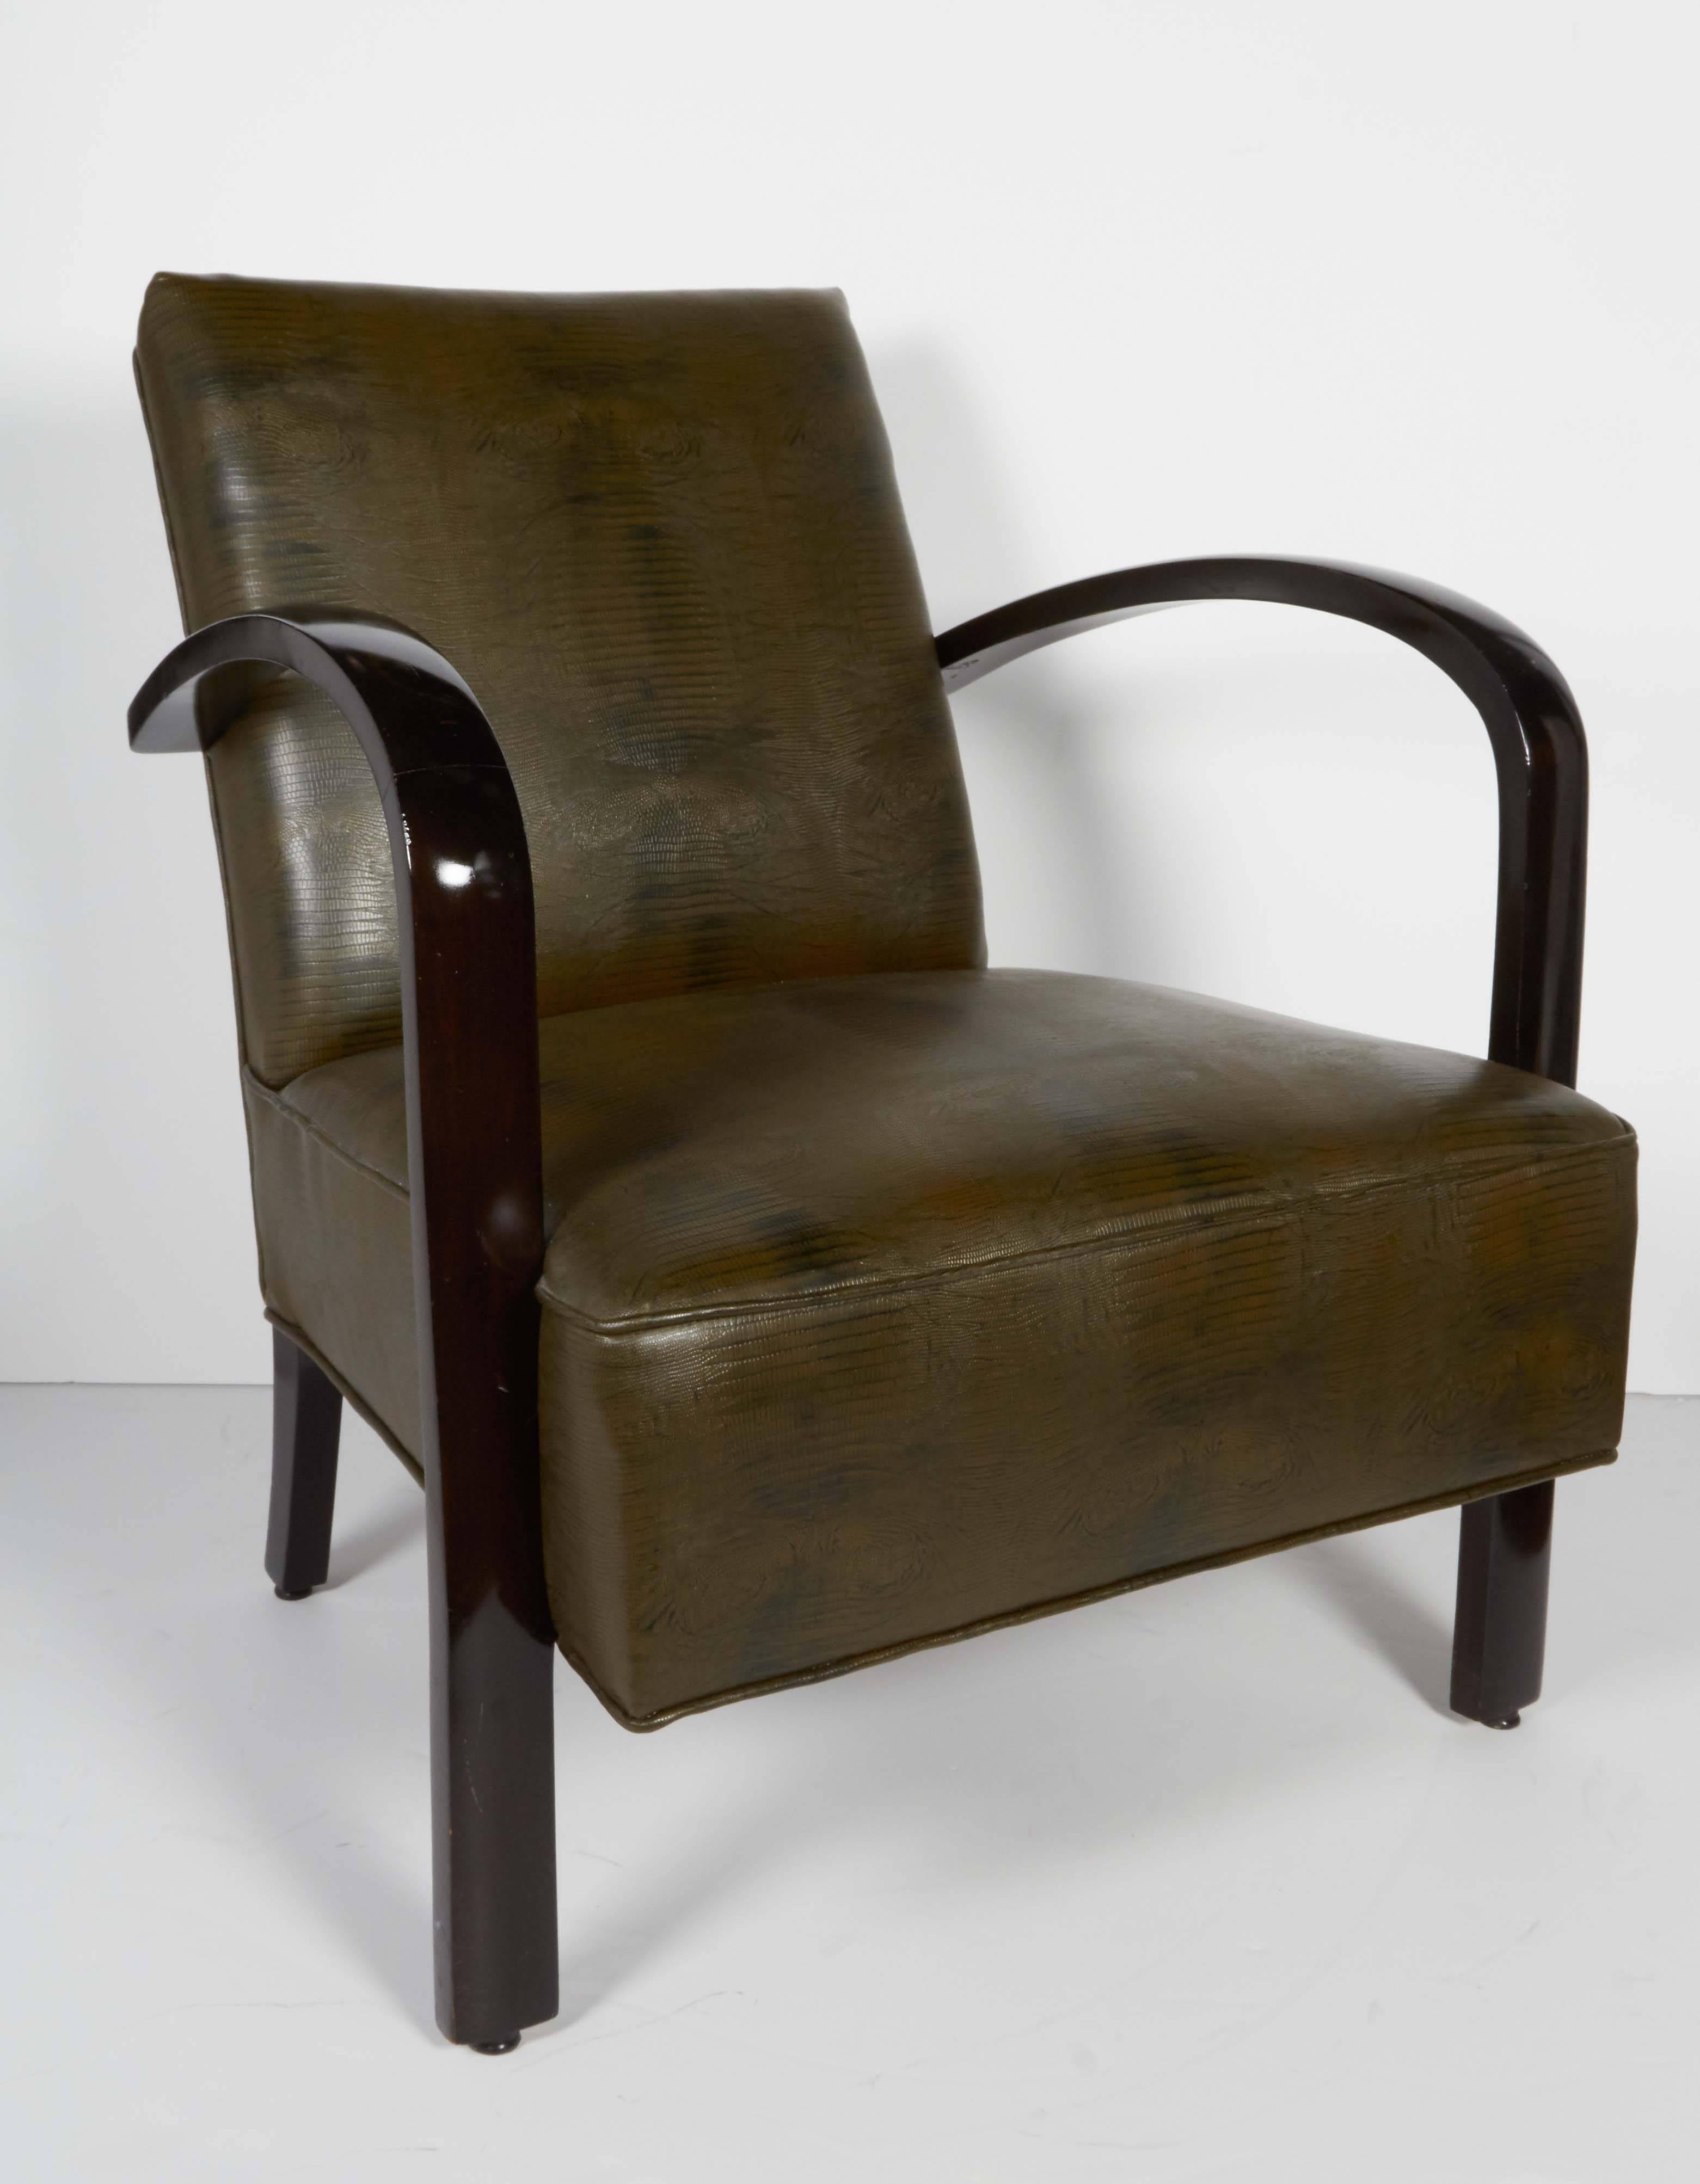 Ebonized Pair of French Art Deco Lounge Chairs